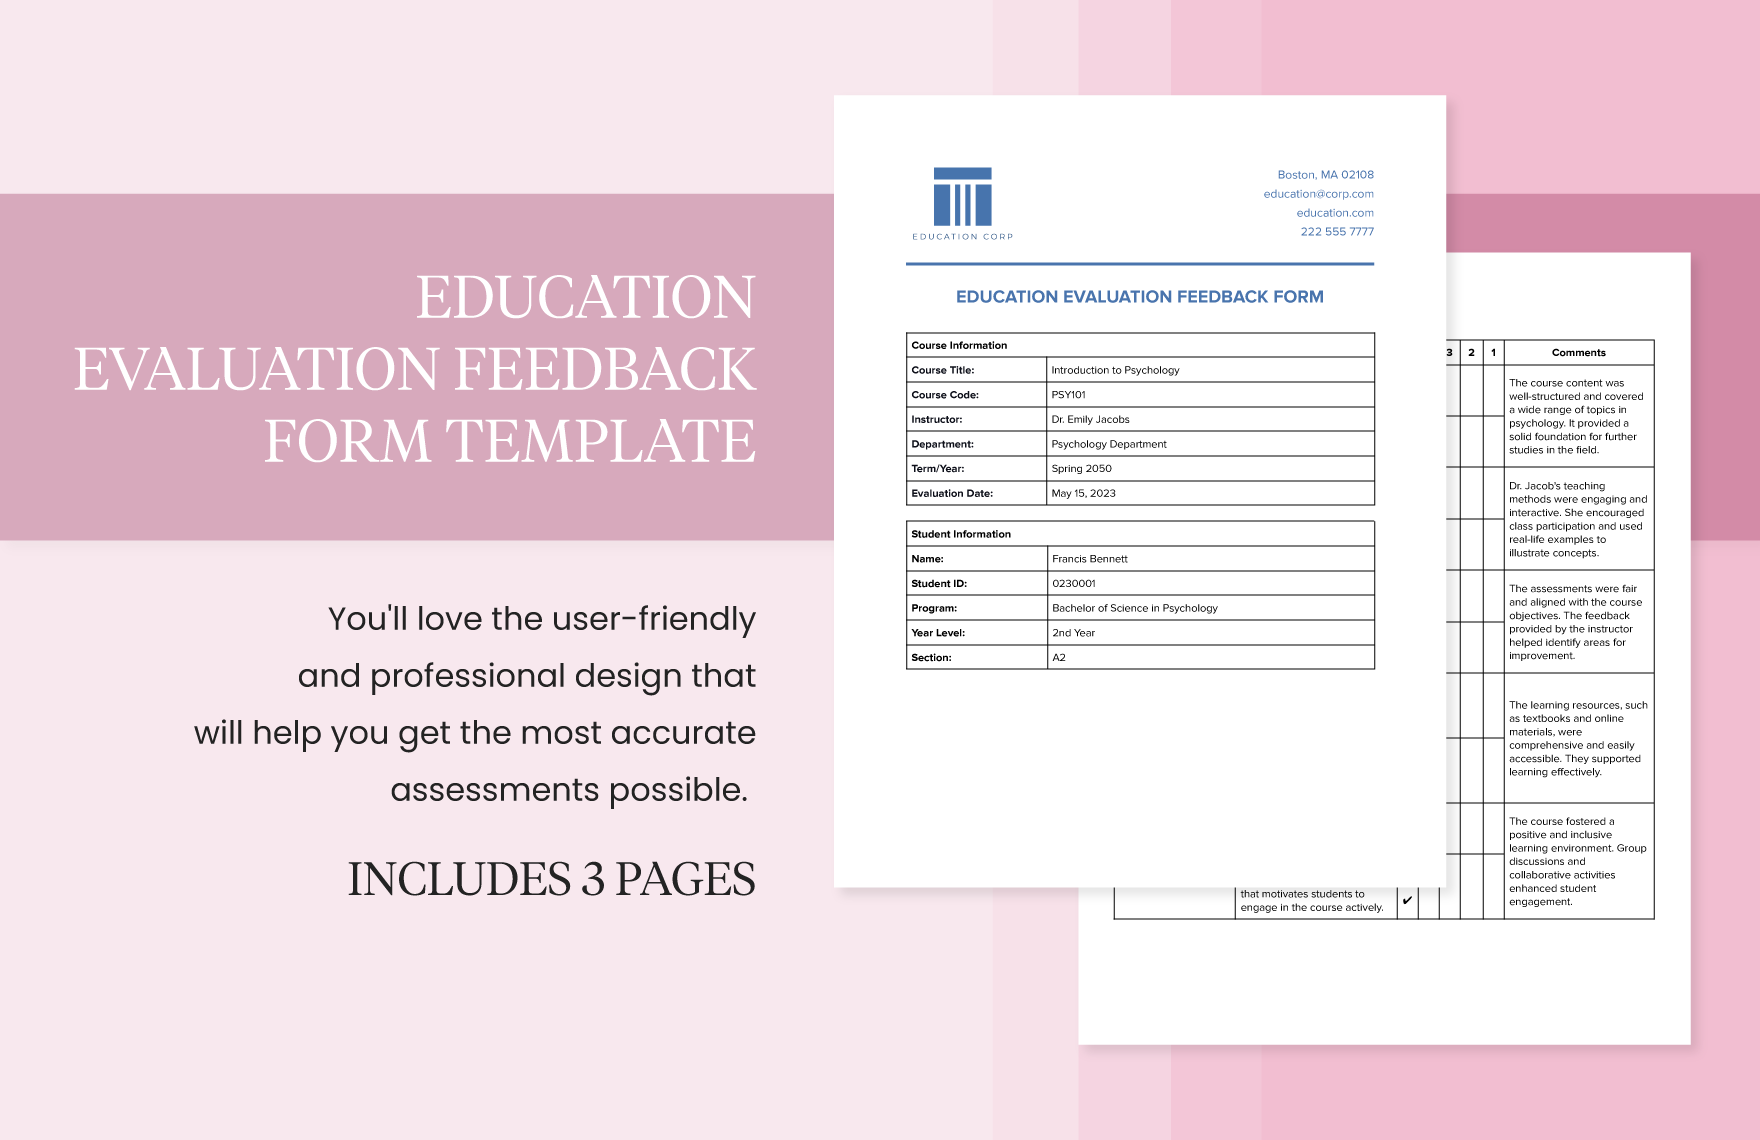 Education Evaluation Feedback Form Template in Word, Google Docs, PDF